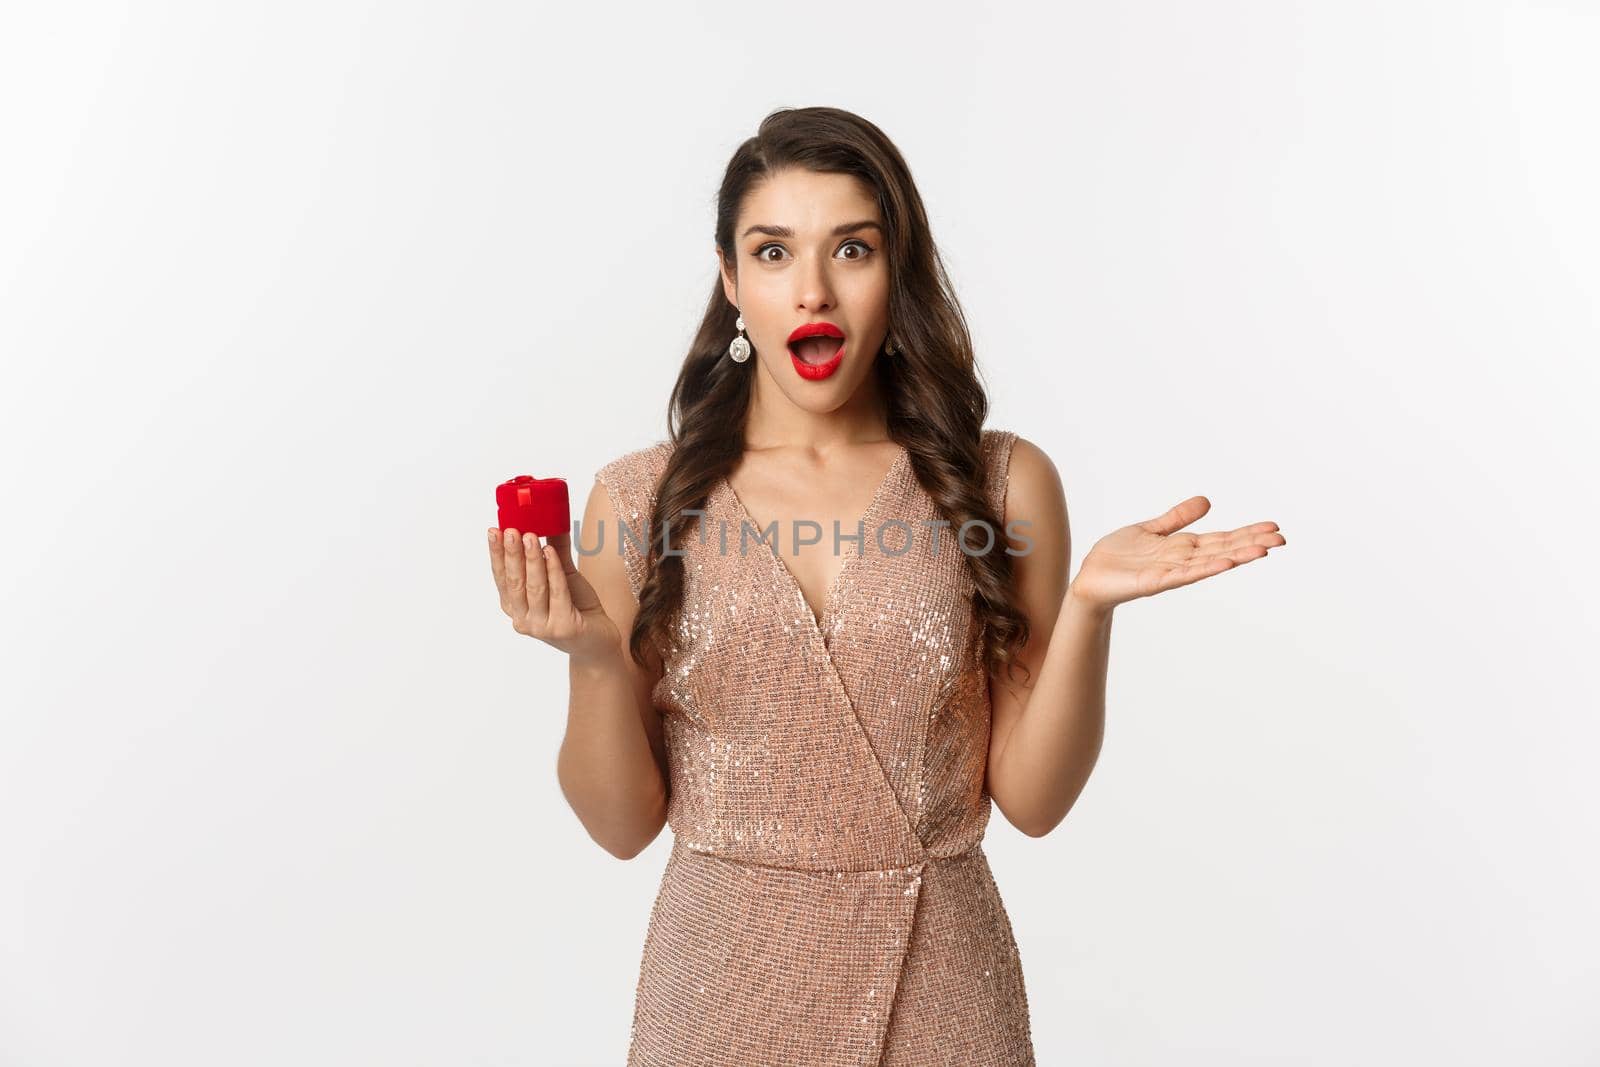 Image of amazed girlfriend holding engagement ring box, looking surprised, receive marriage proposal, wearing elegant dress, white background.